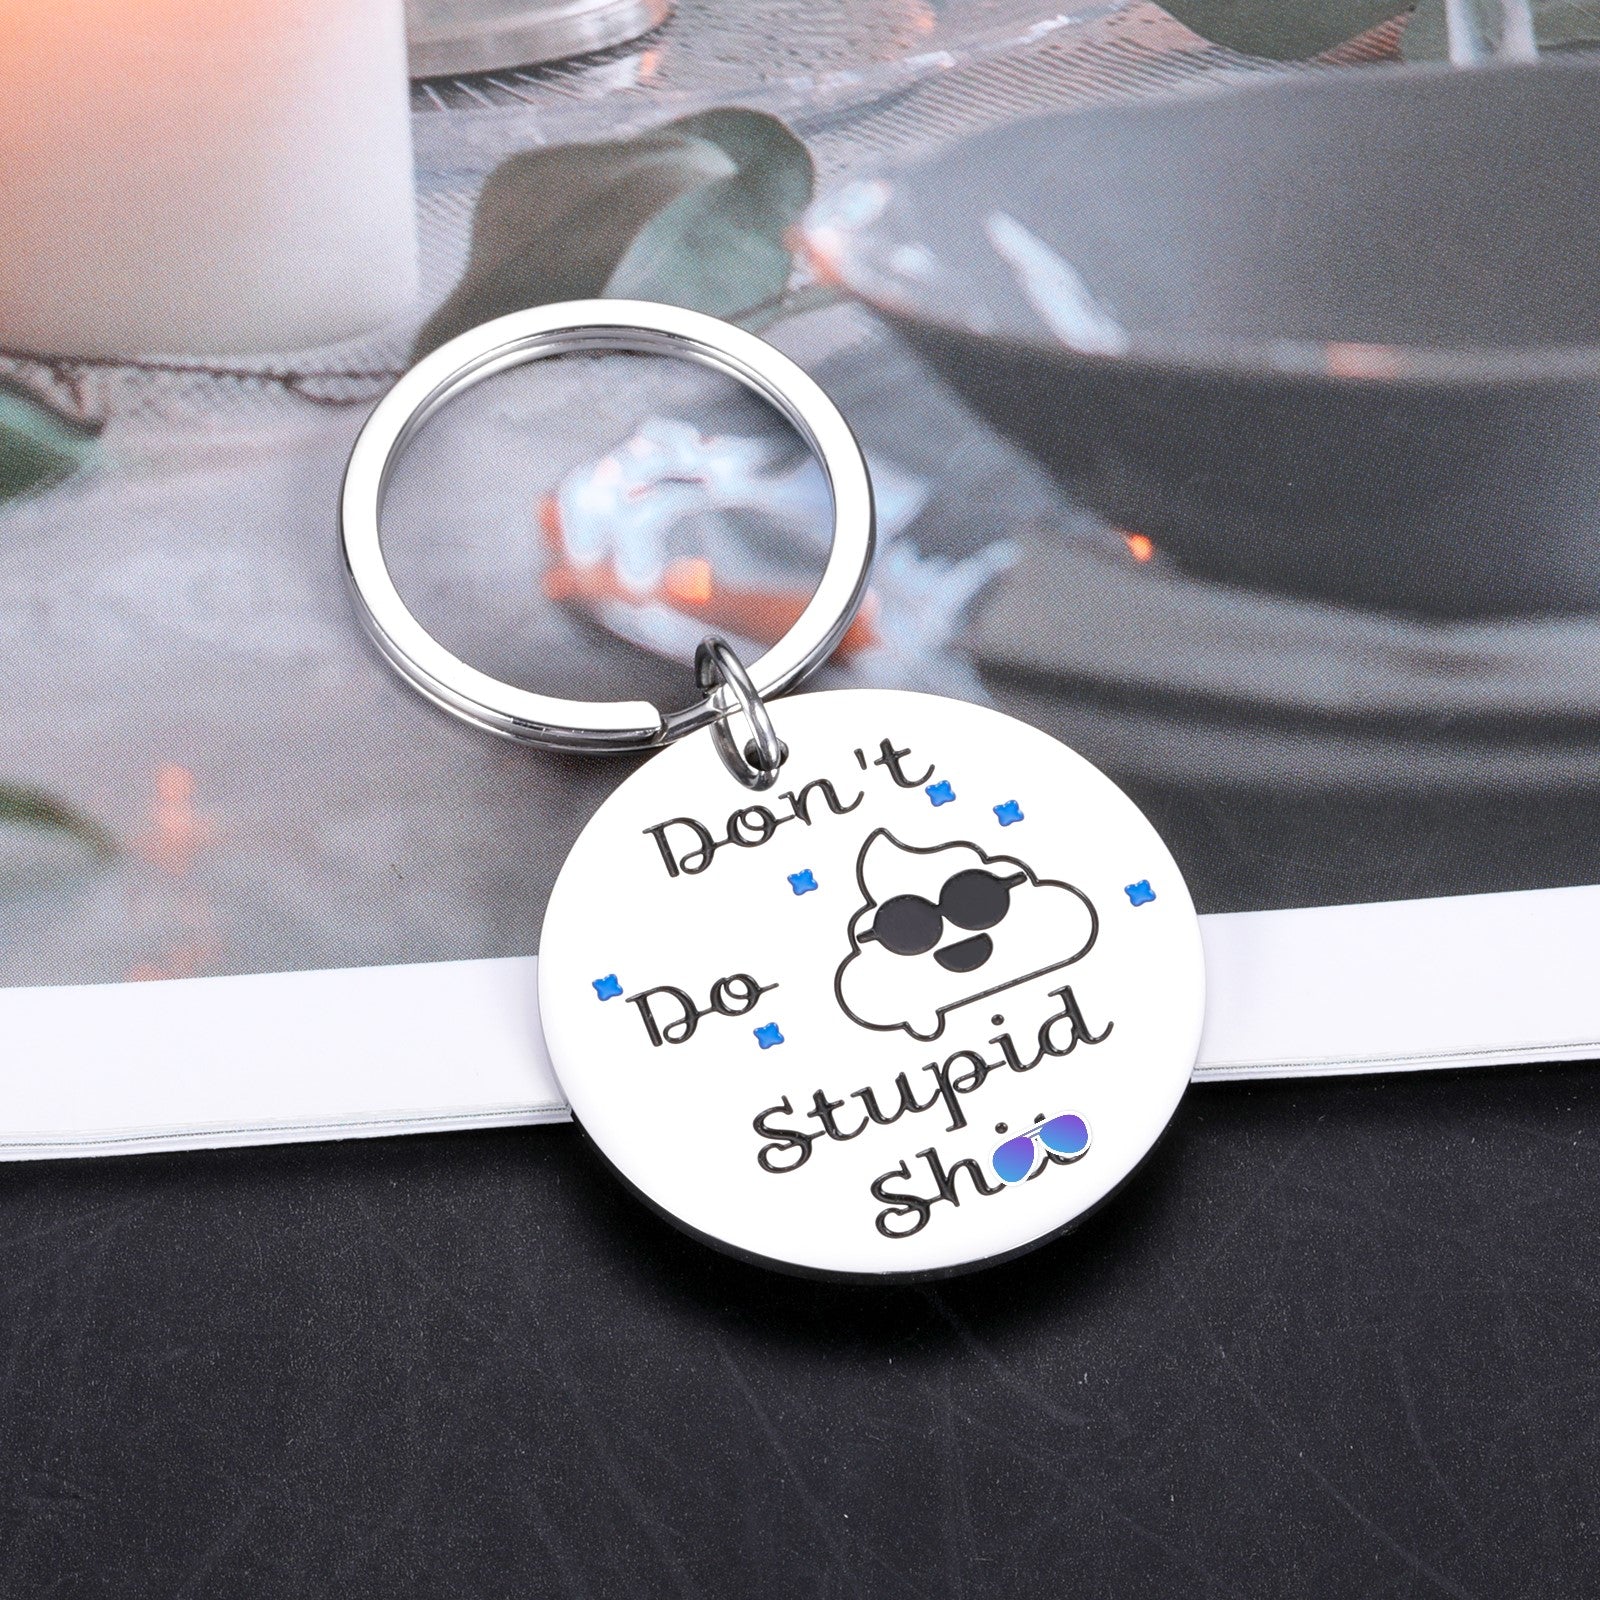 Don't Do Stupid Shit Keychain, Funny Gift for Teens Son Daughter